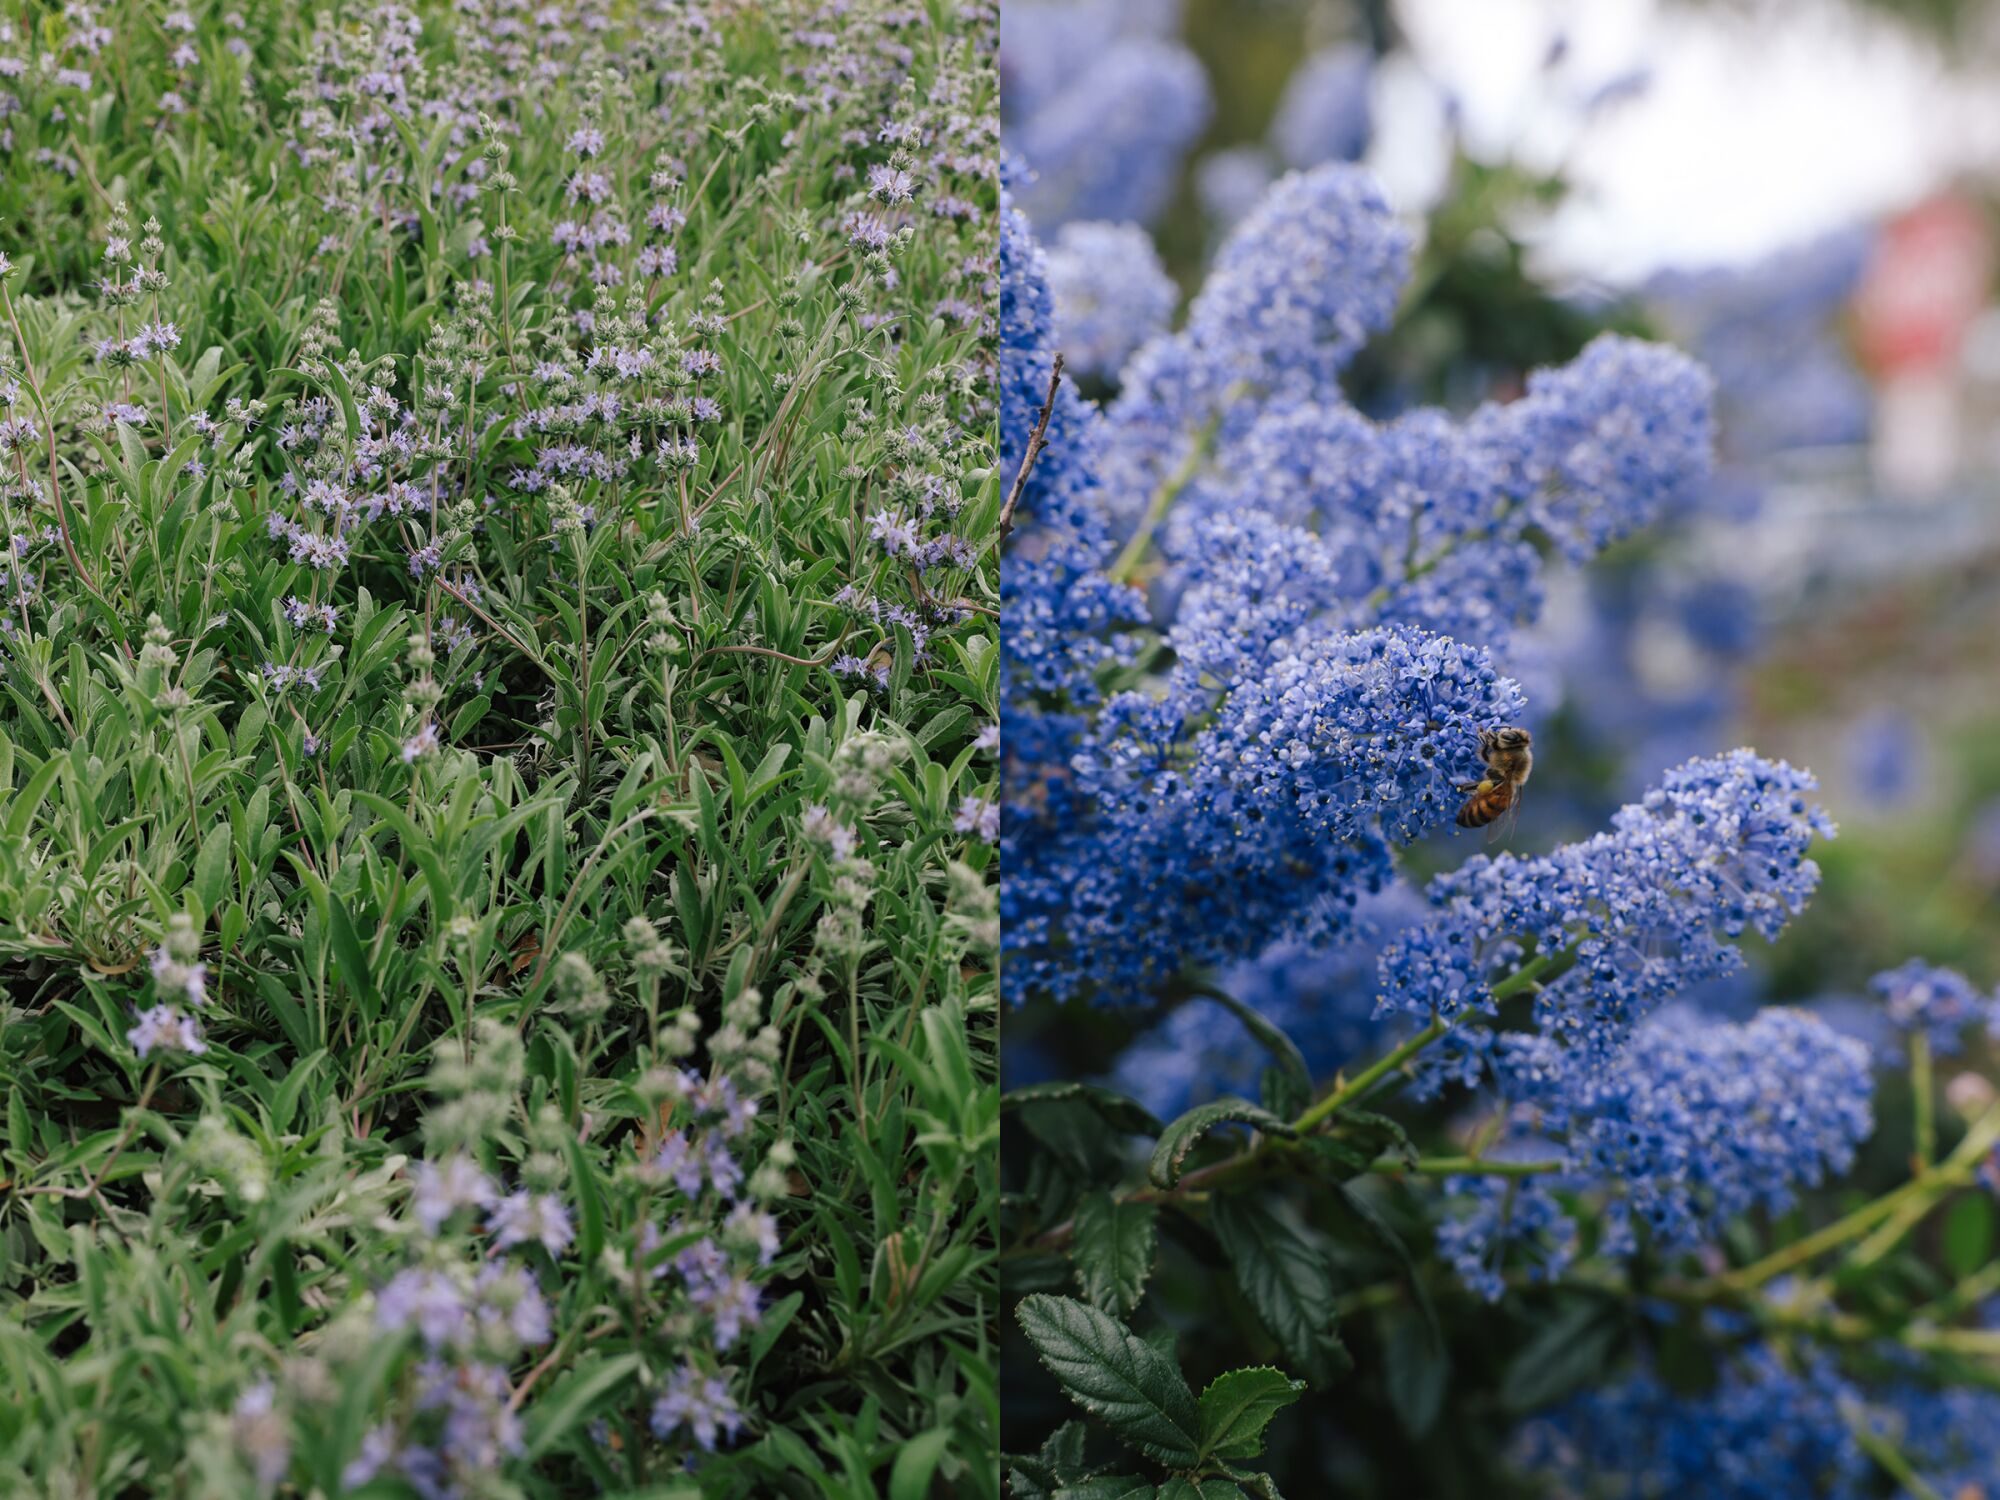 Two photos side by side of some plants in shades of green, blue and purple. There is a bee on the blue flowers on the right.